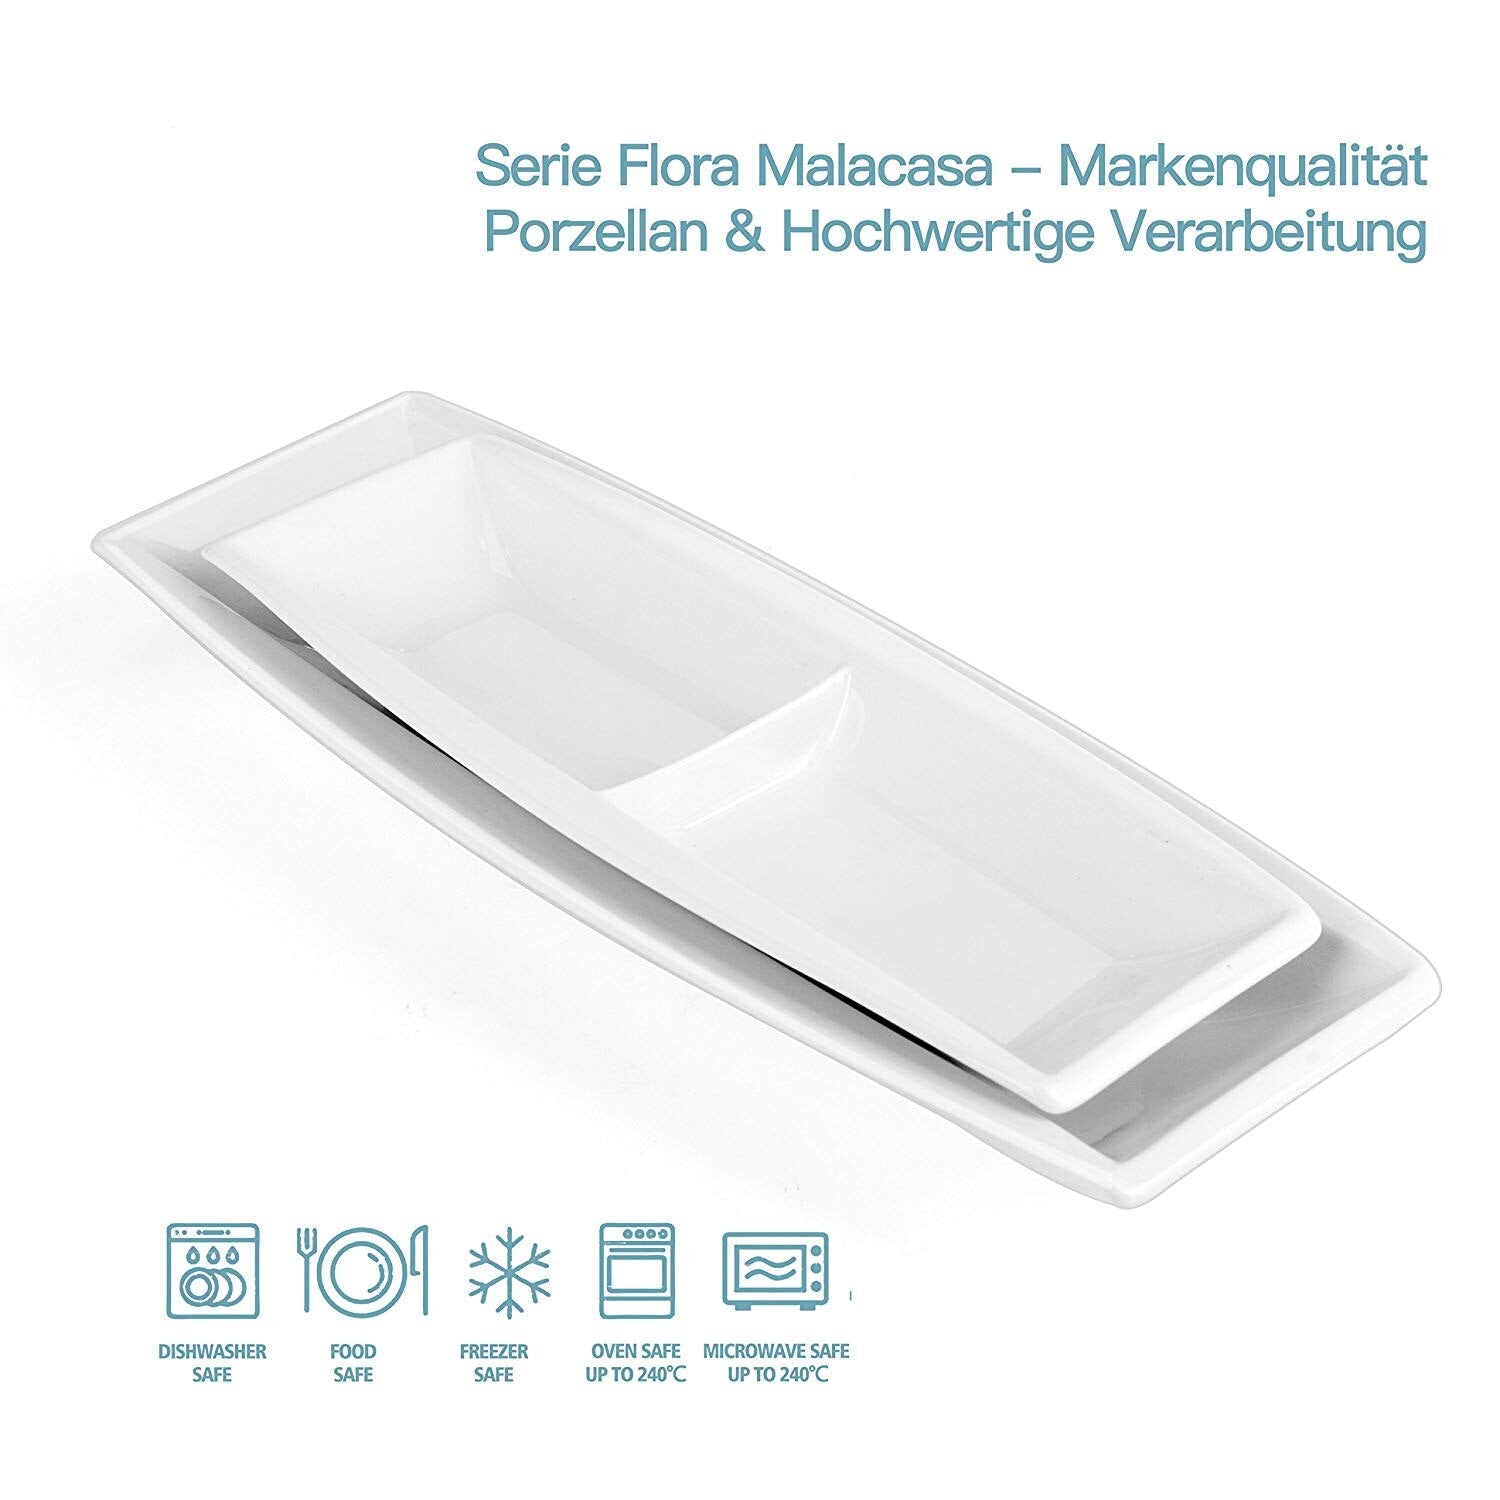 Blance 2-Piece Ivory White Porcelain Serving Tray of 10" Two Section Dish and 12.25"  Dessert/Snack Platter - Nordic Side - 10, 1225, and, Blance, Dessert, Dish, Ivory, Kitchen, MALACASA, of,